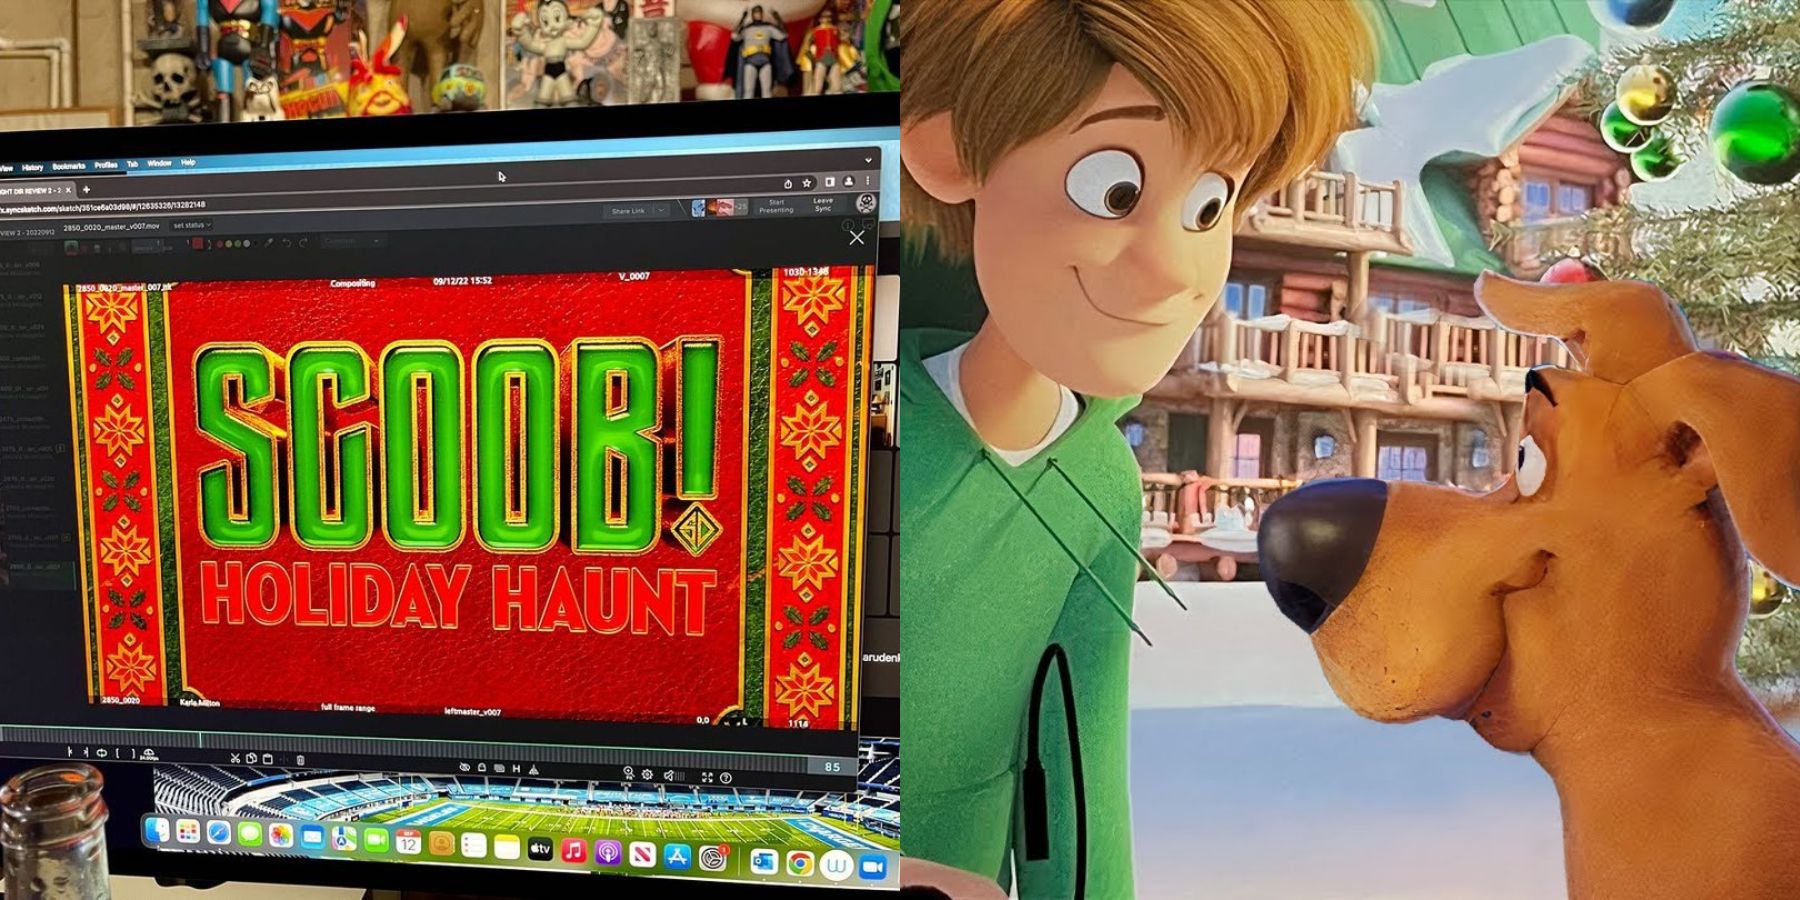 Scoob! Holiday Haunt Director Finished Film After Warner Bros. Axed It